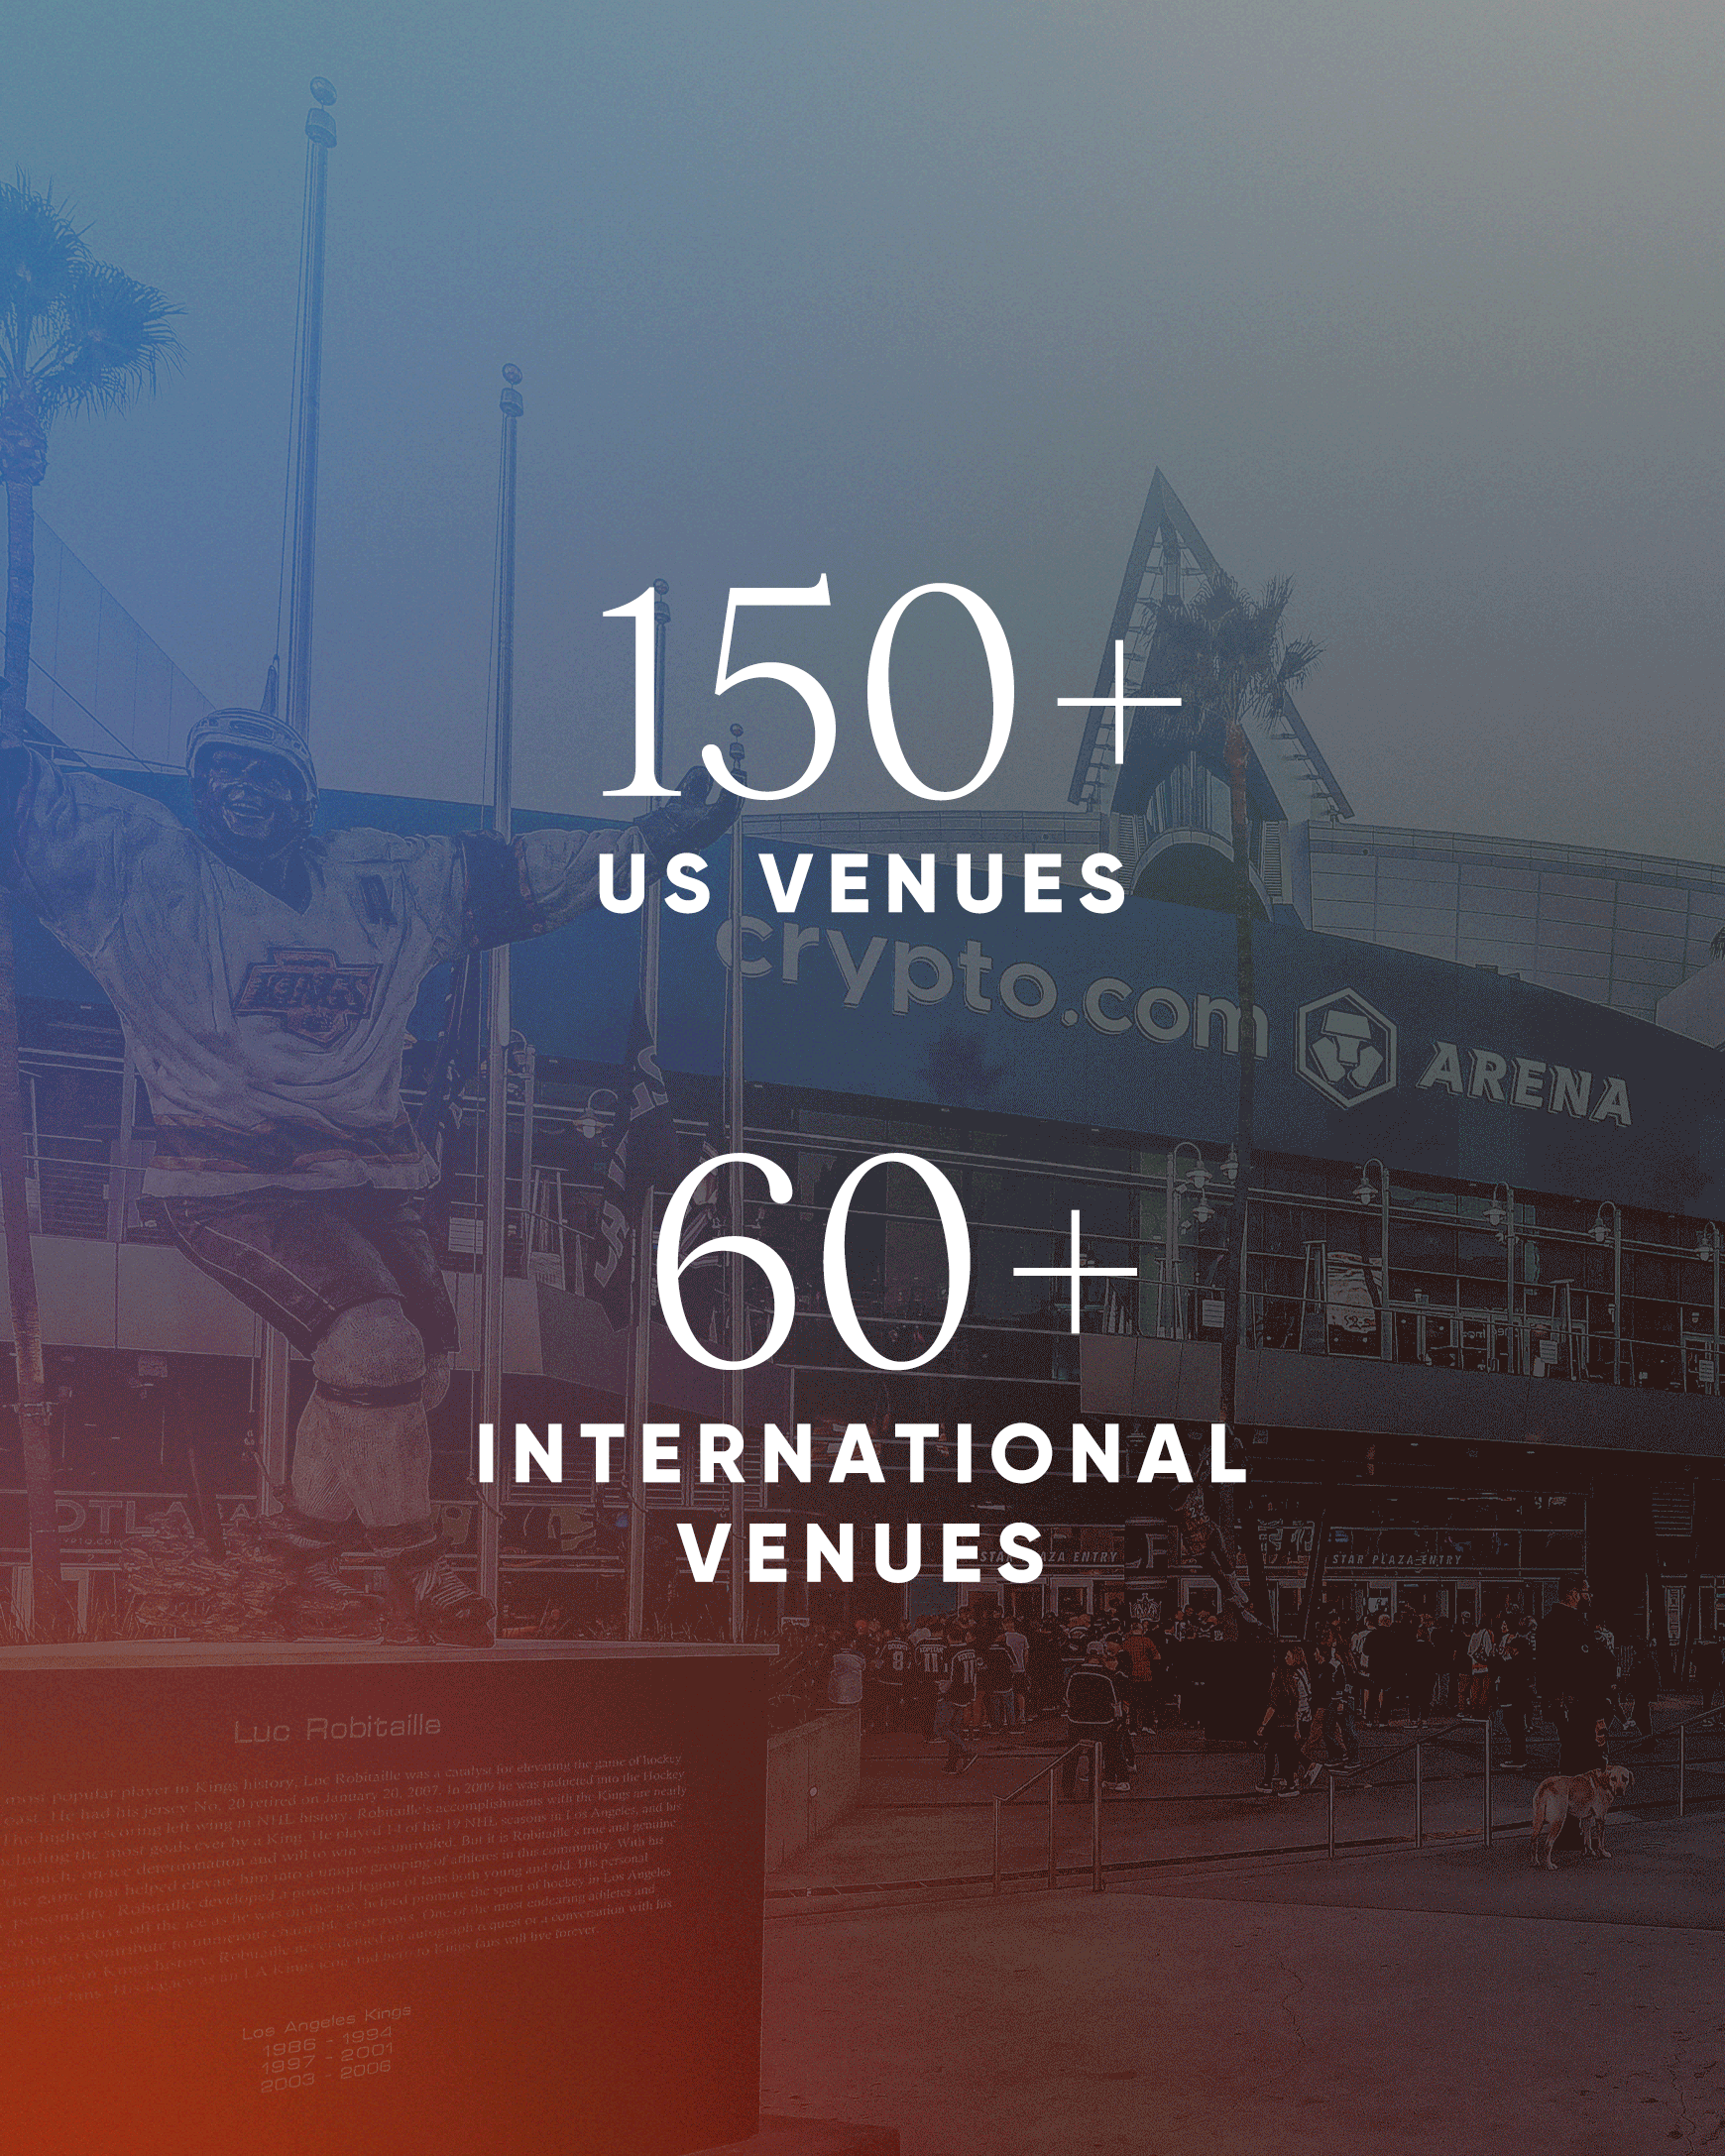 AXS TICKETS MORE THAN 300 PROPERTIES AND SPANS THE WORLD'S MOST ICONIC TEAMS, TOURS, FESTIVALS, ARENAS, CLUBS AND EVENTS.